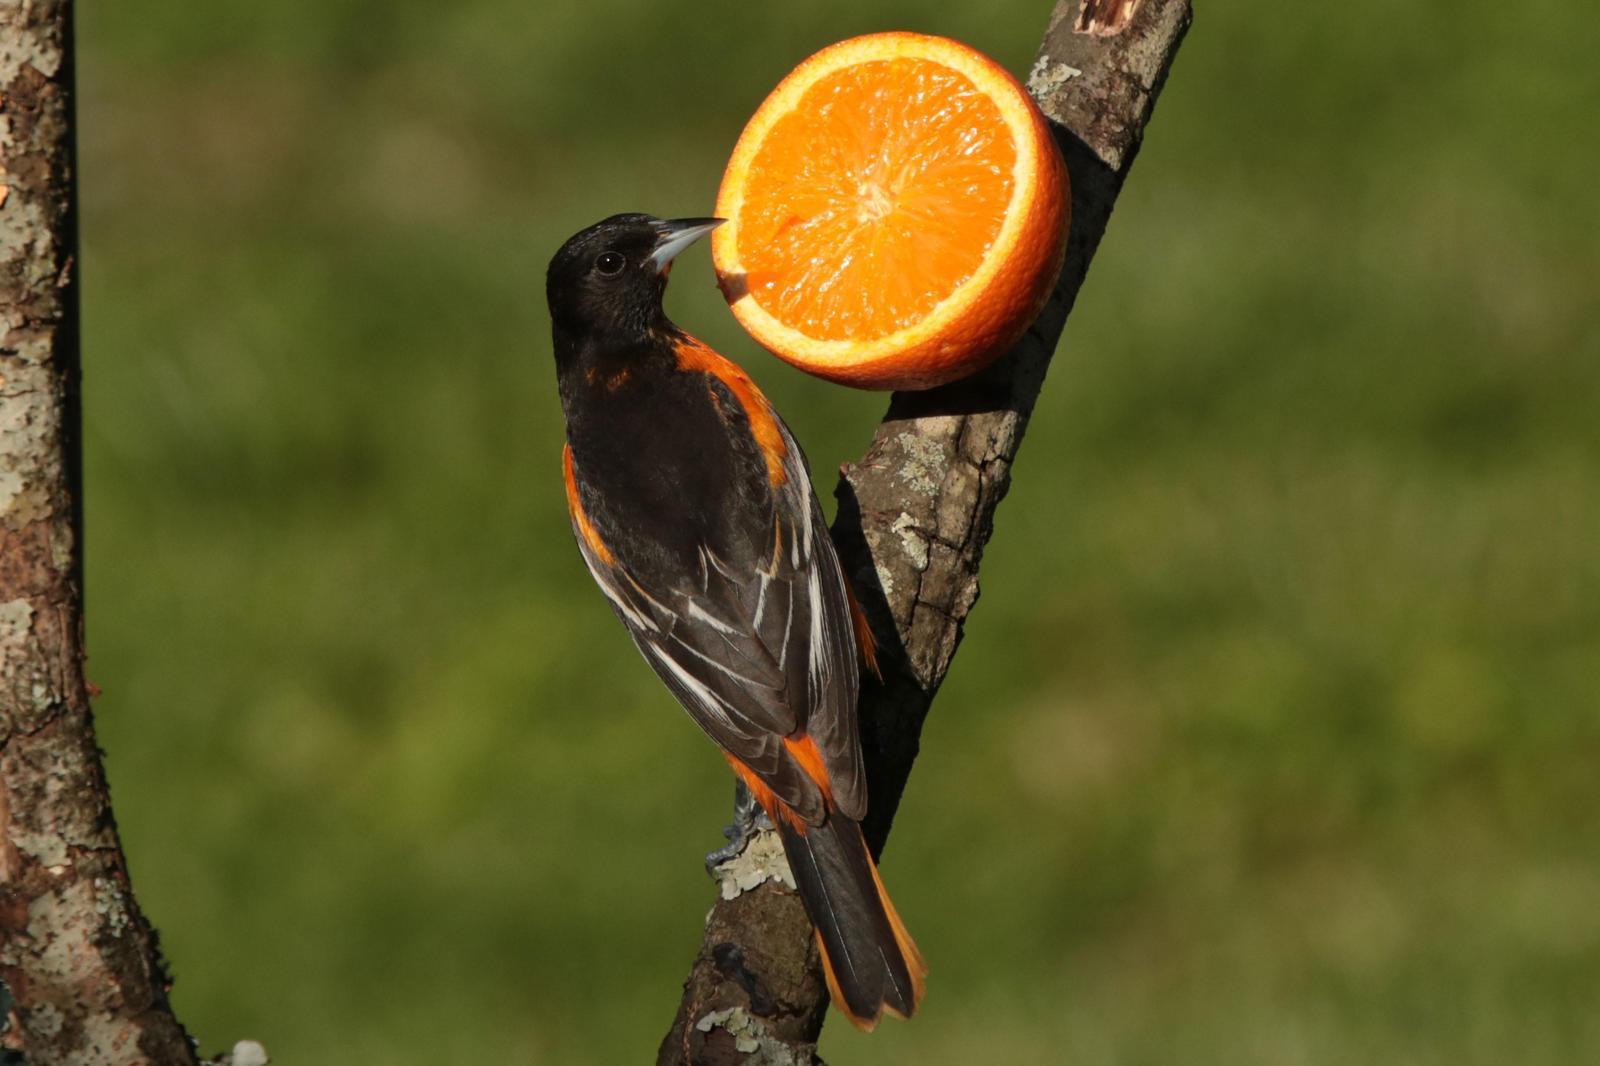 Baltimore Oriole Photo by Kristy Baker